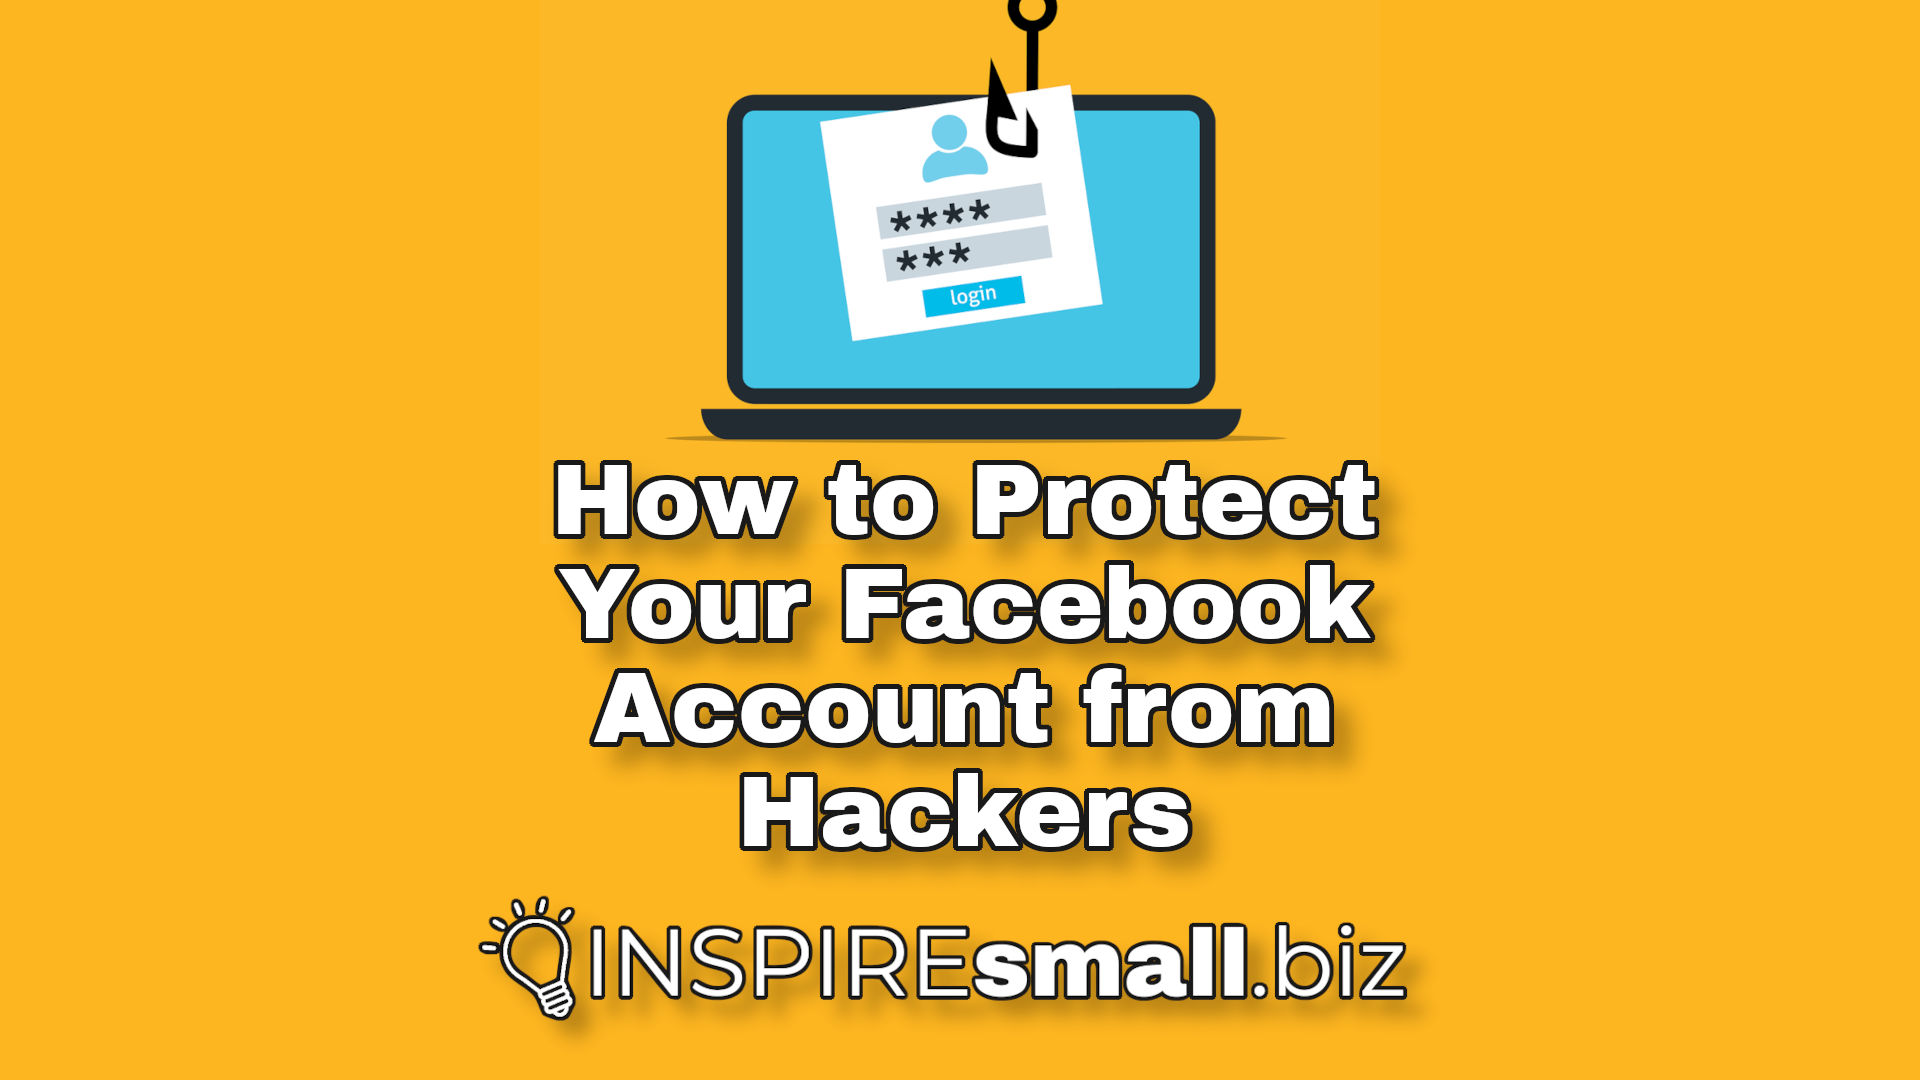 How to Protect Your Facebook Account from Hackers